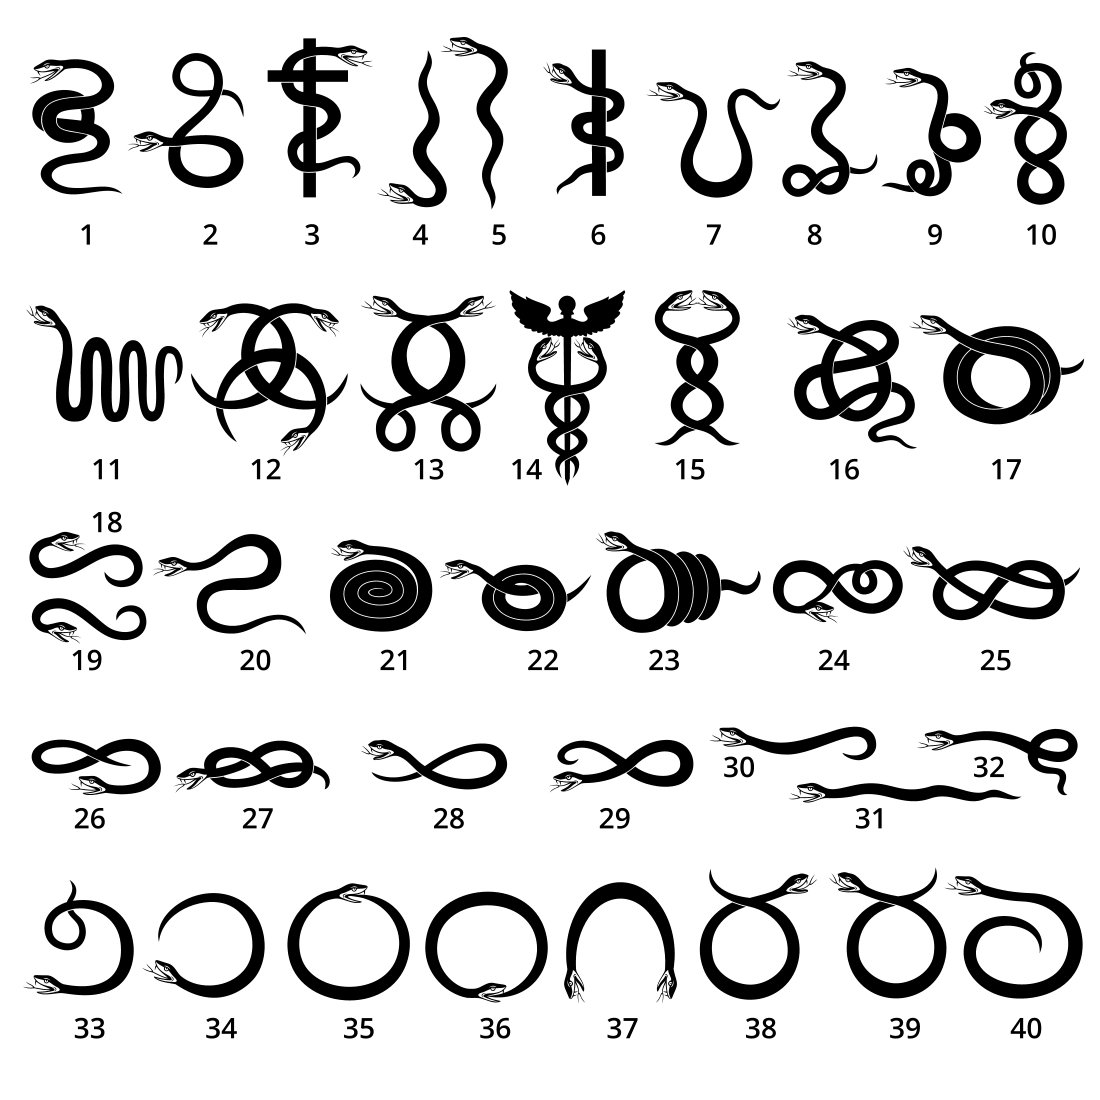 Number of different types of scissors.